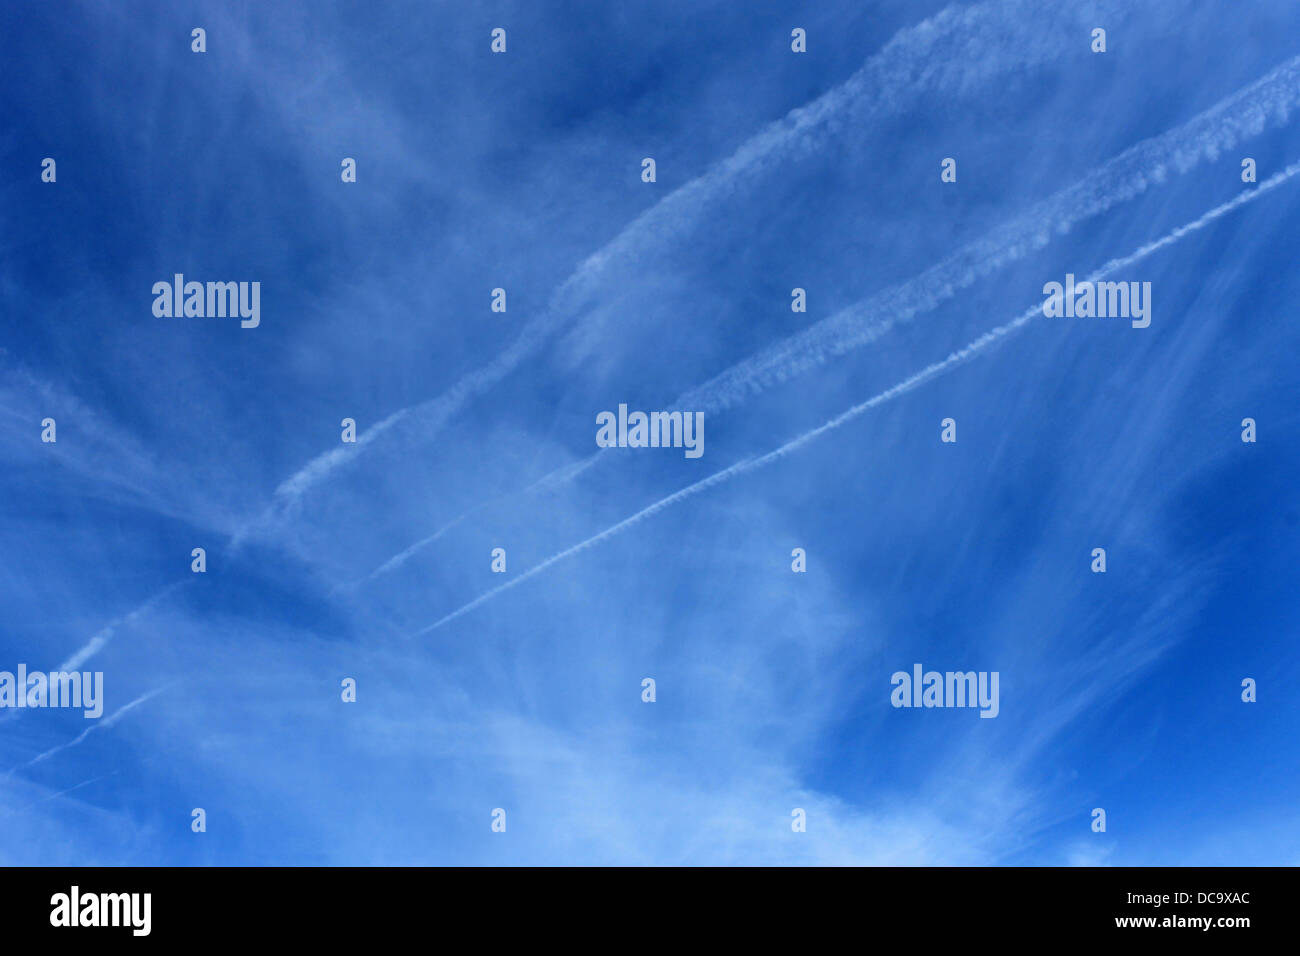 Scenic view of white vapor trails in blue sky. Stock Photo